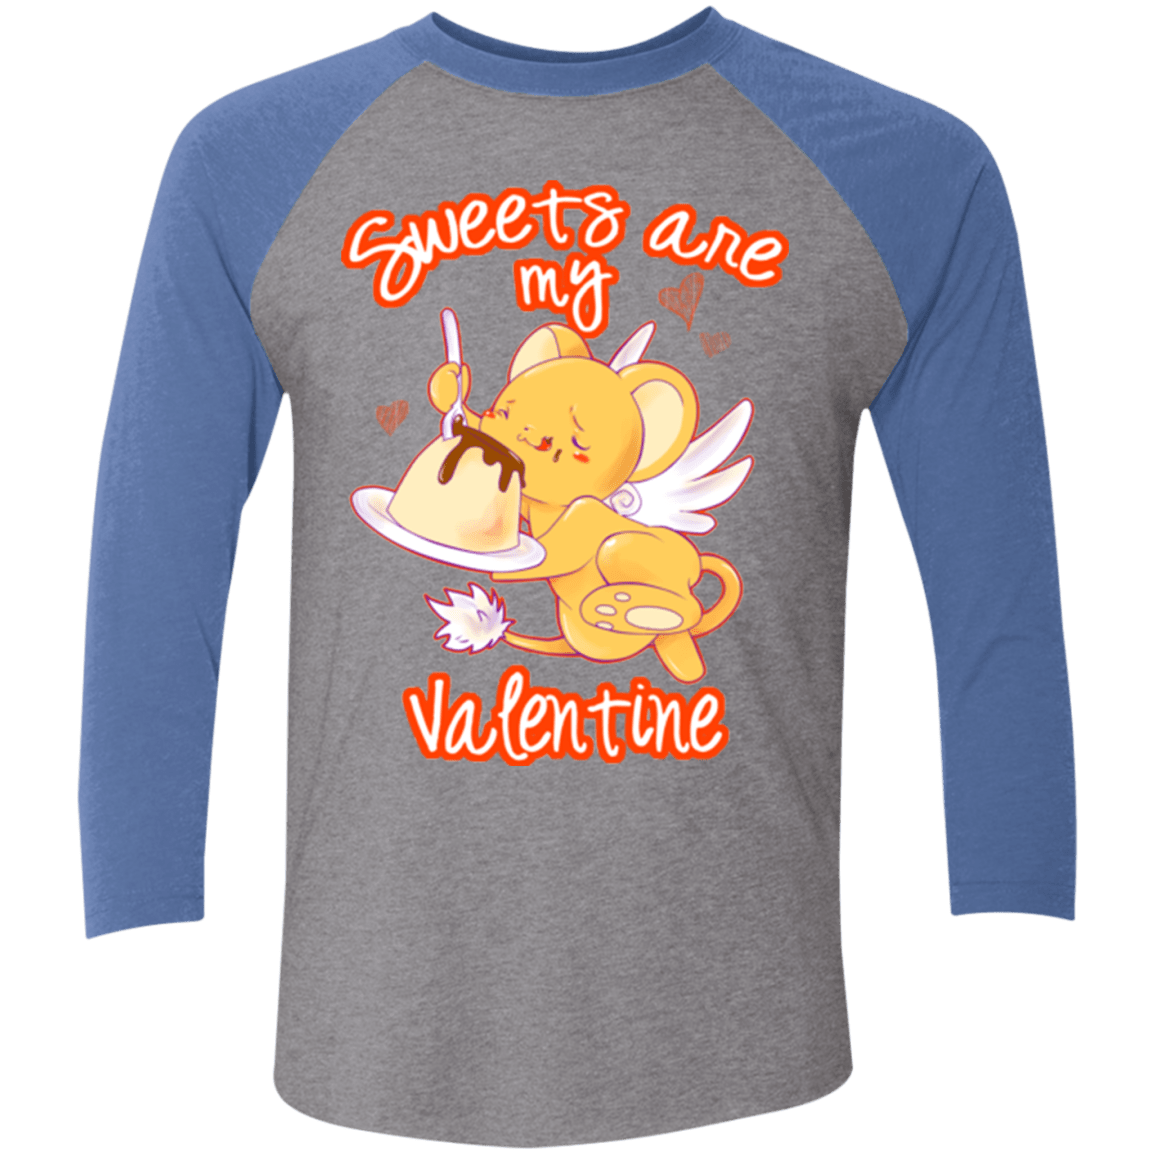 T-Shirts Premium Heather/ Vintage Royal / X-Small Sweets are my Valentine Triblend 3/4 Sleeve